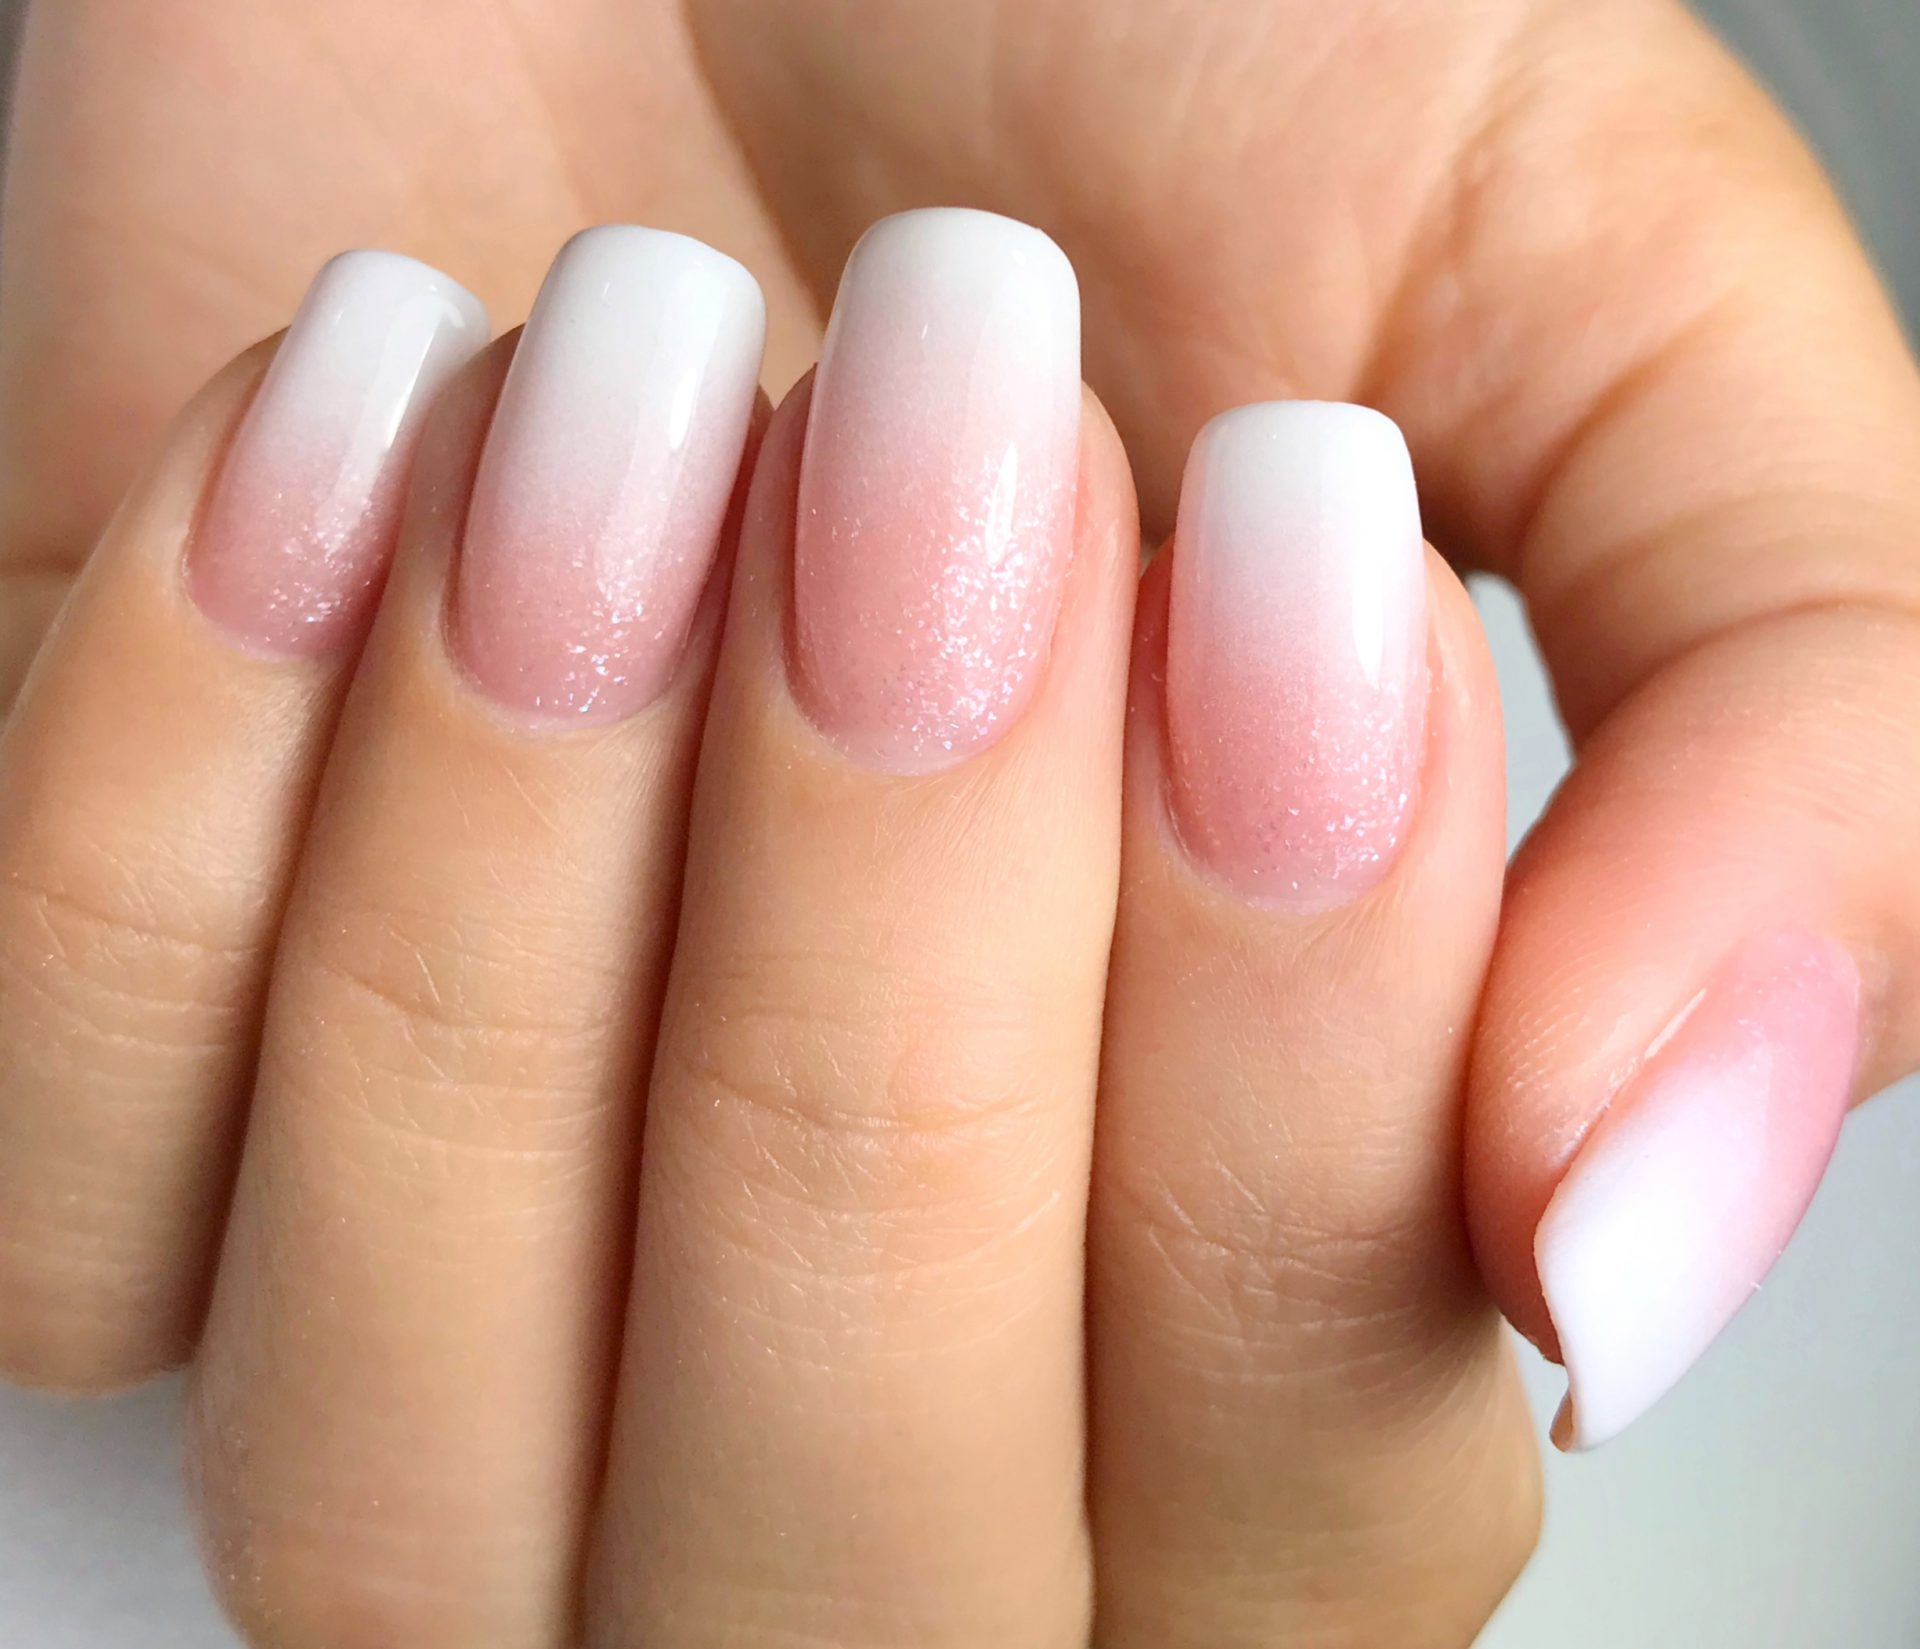 Acrilic Nails with French Tip and Level 3 Gelish at Chop Shop Nail Salon